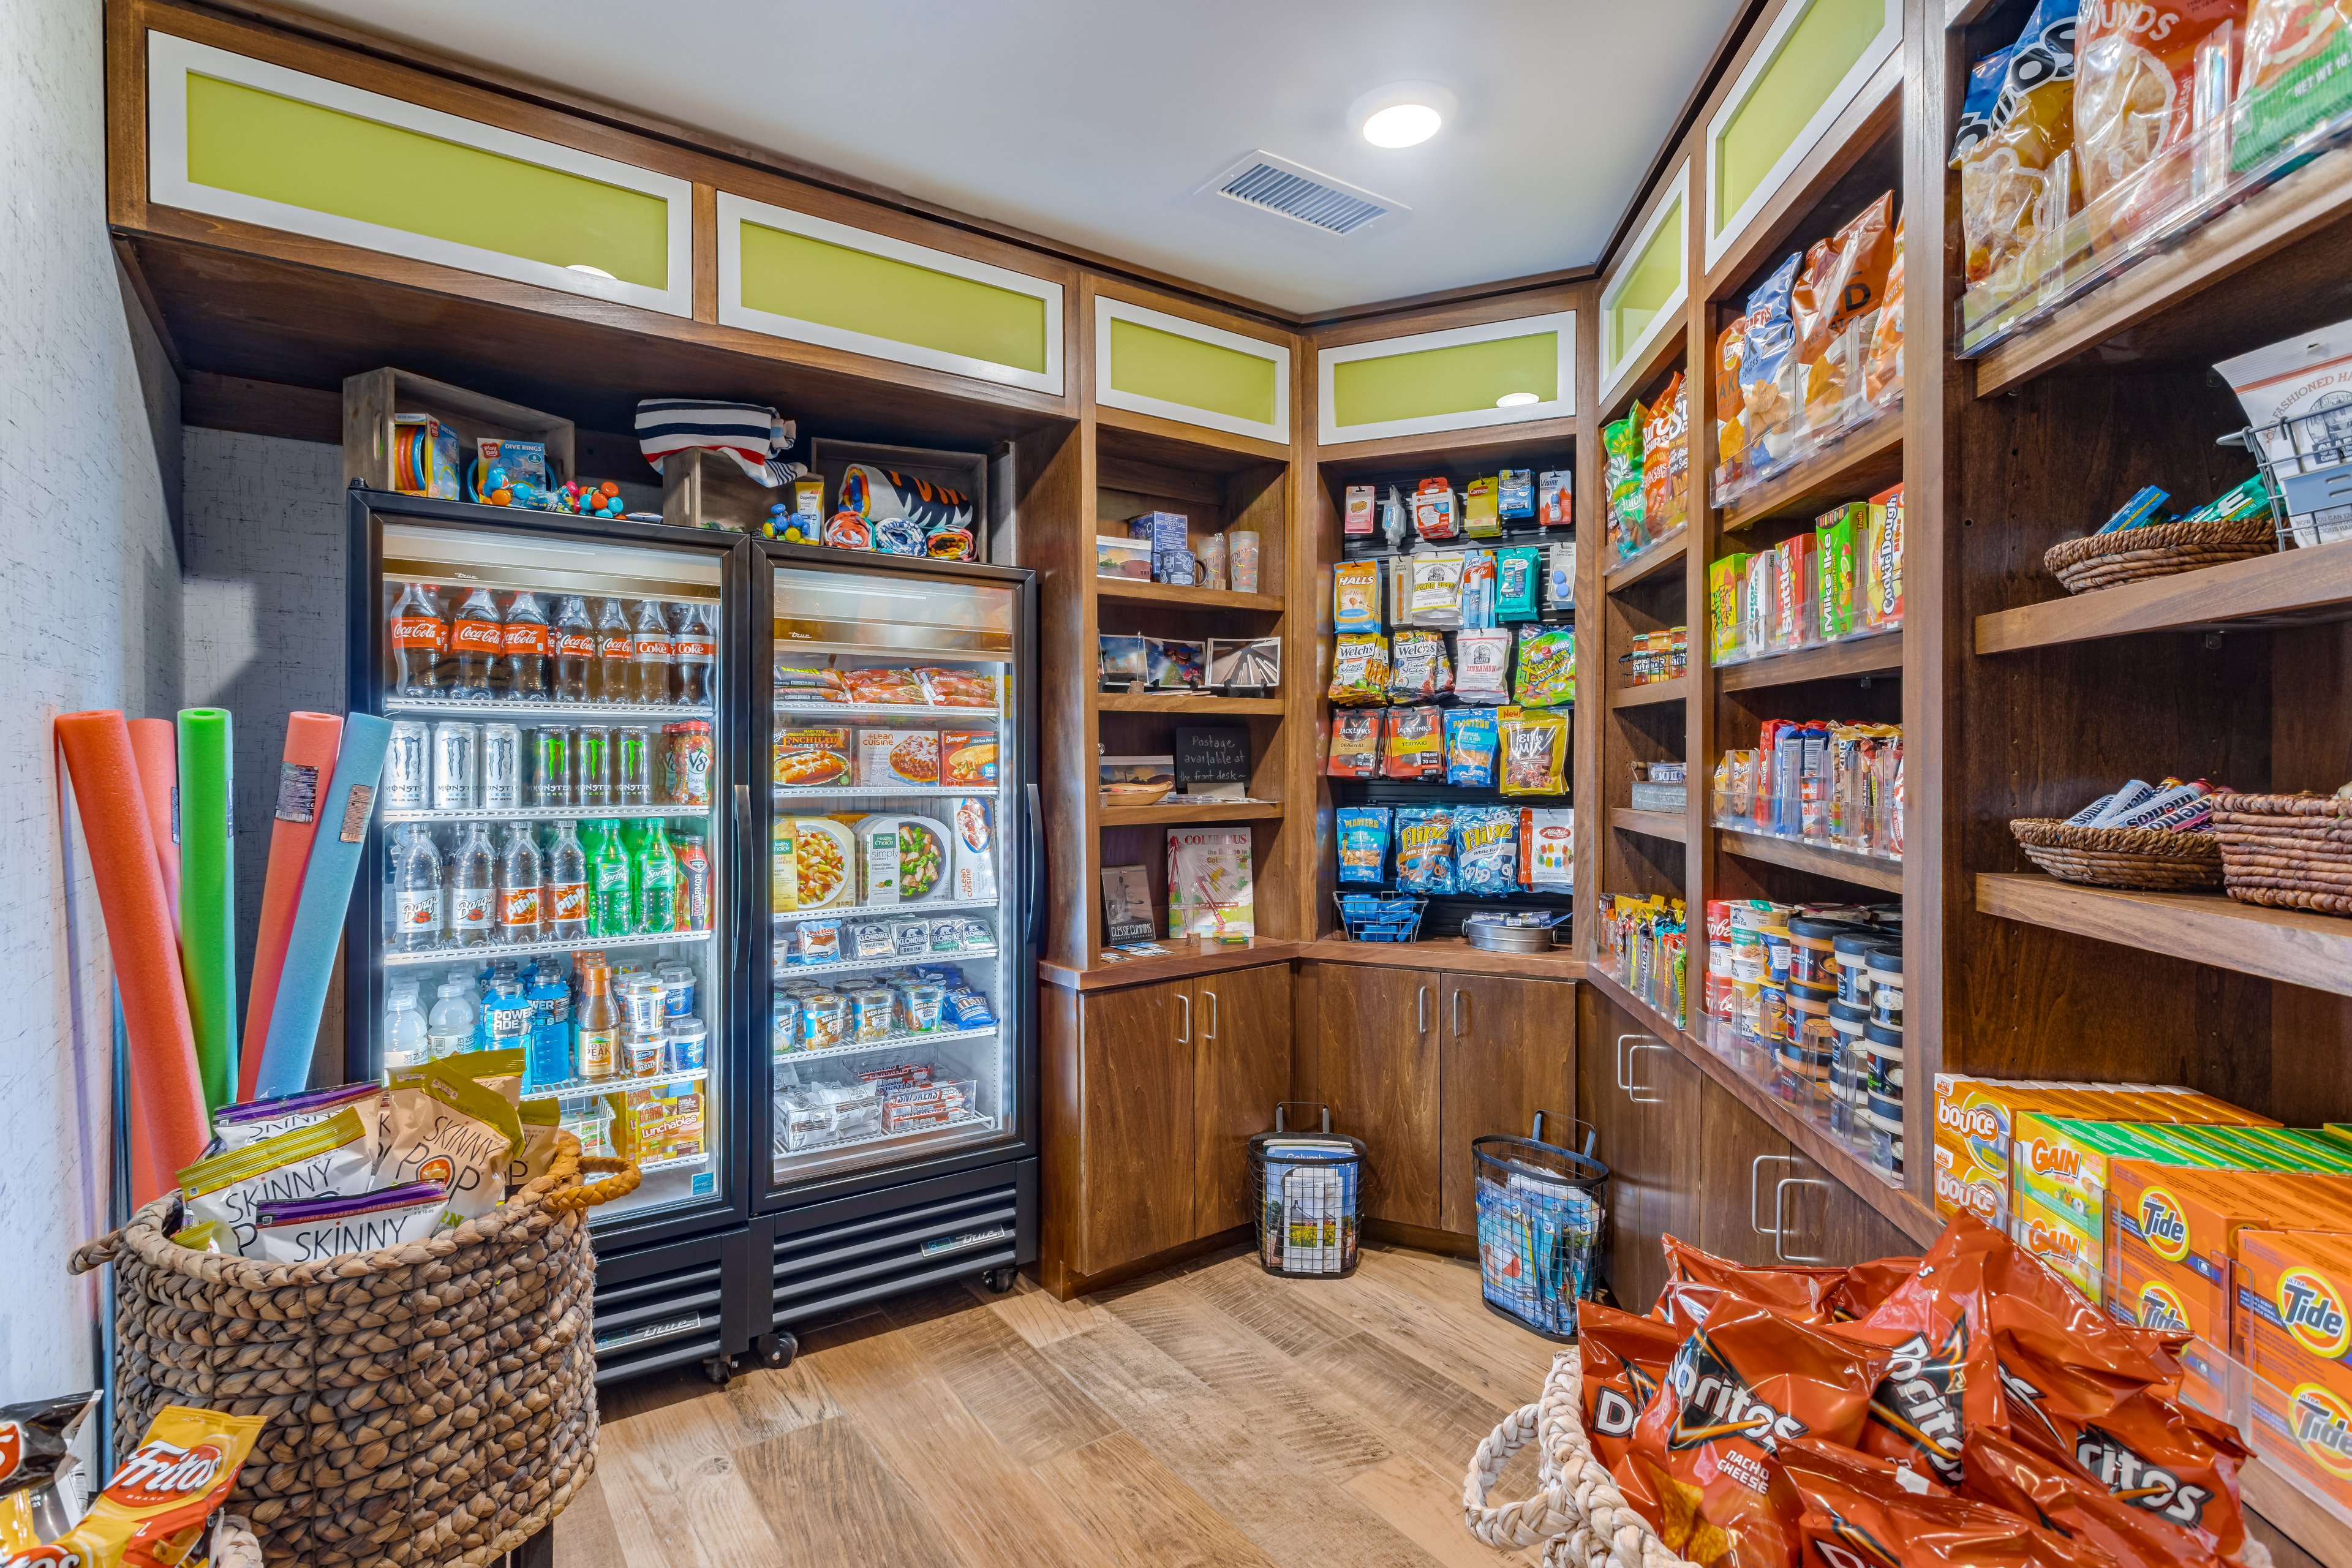 An extensive selection of snacks, drinks, and every day items